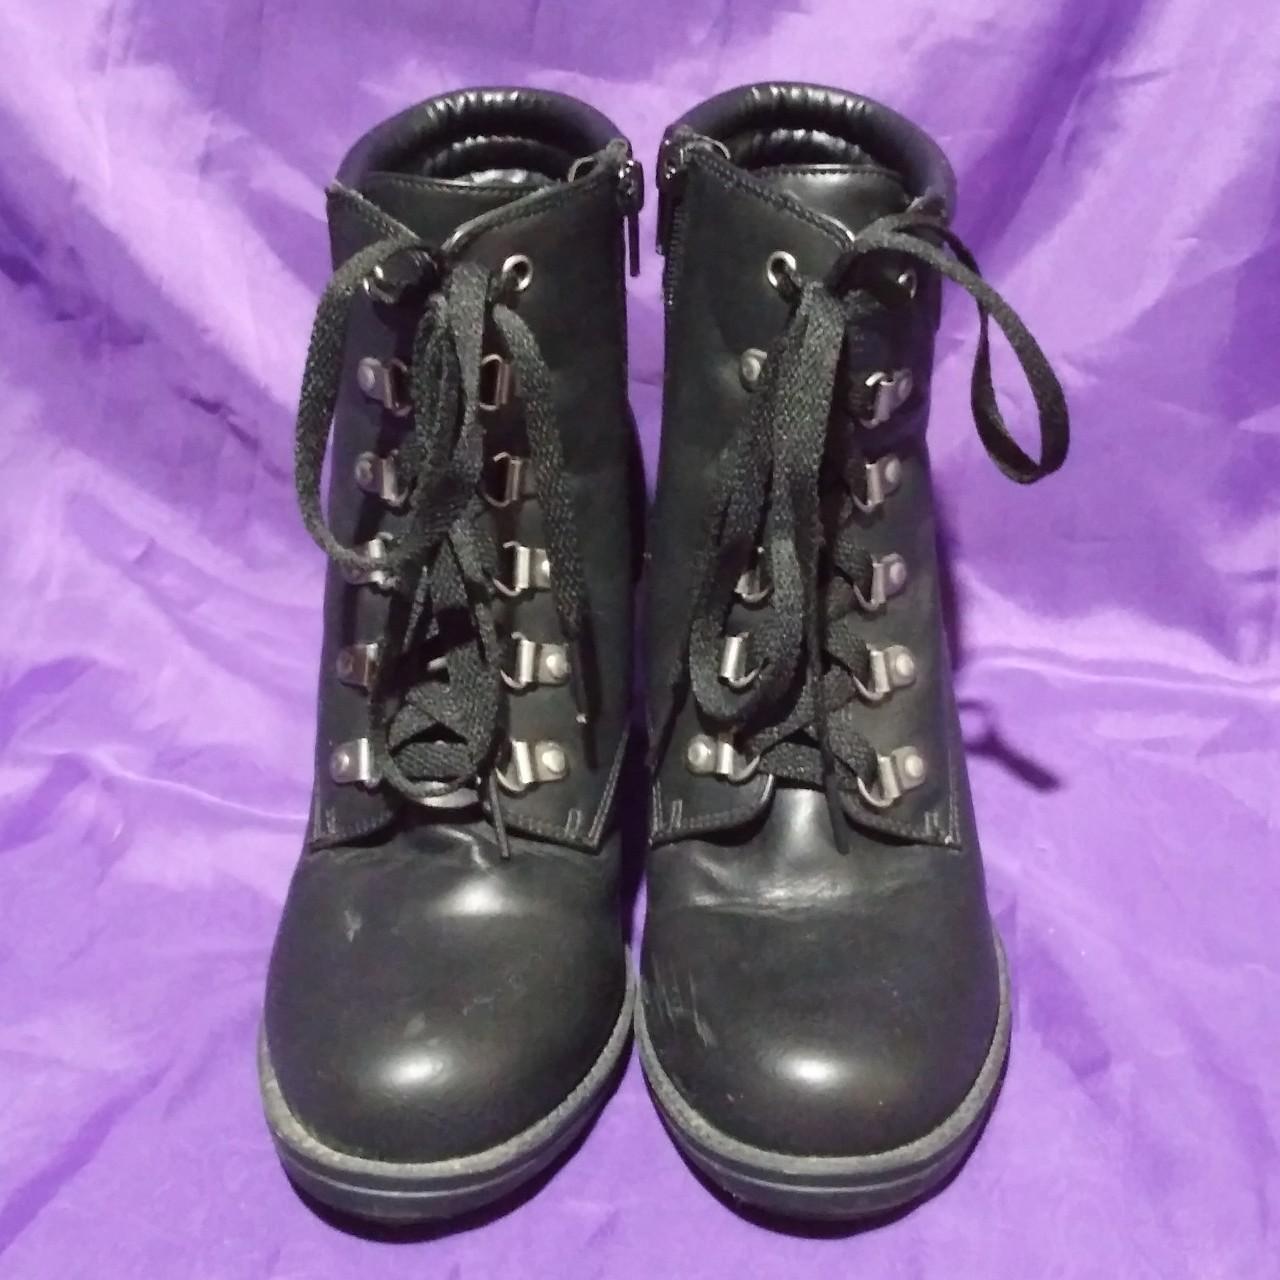 Women's Black and Silver Boots | Depop